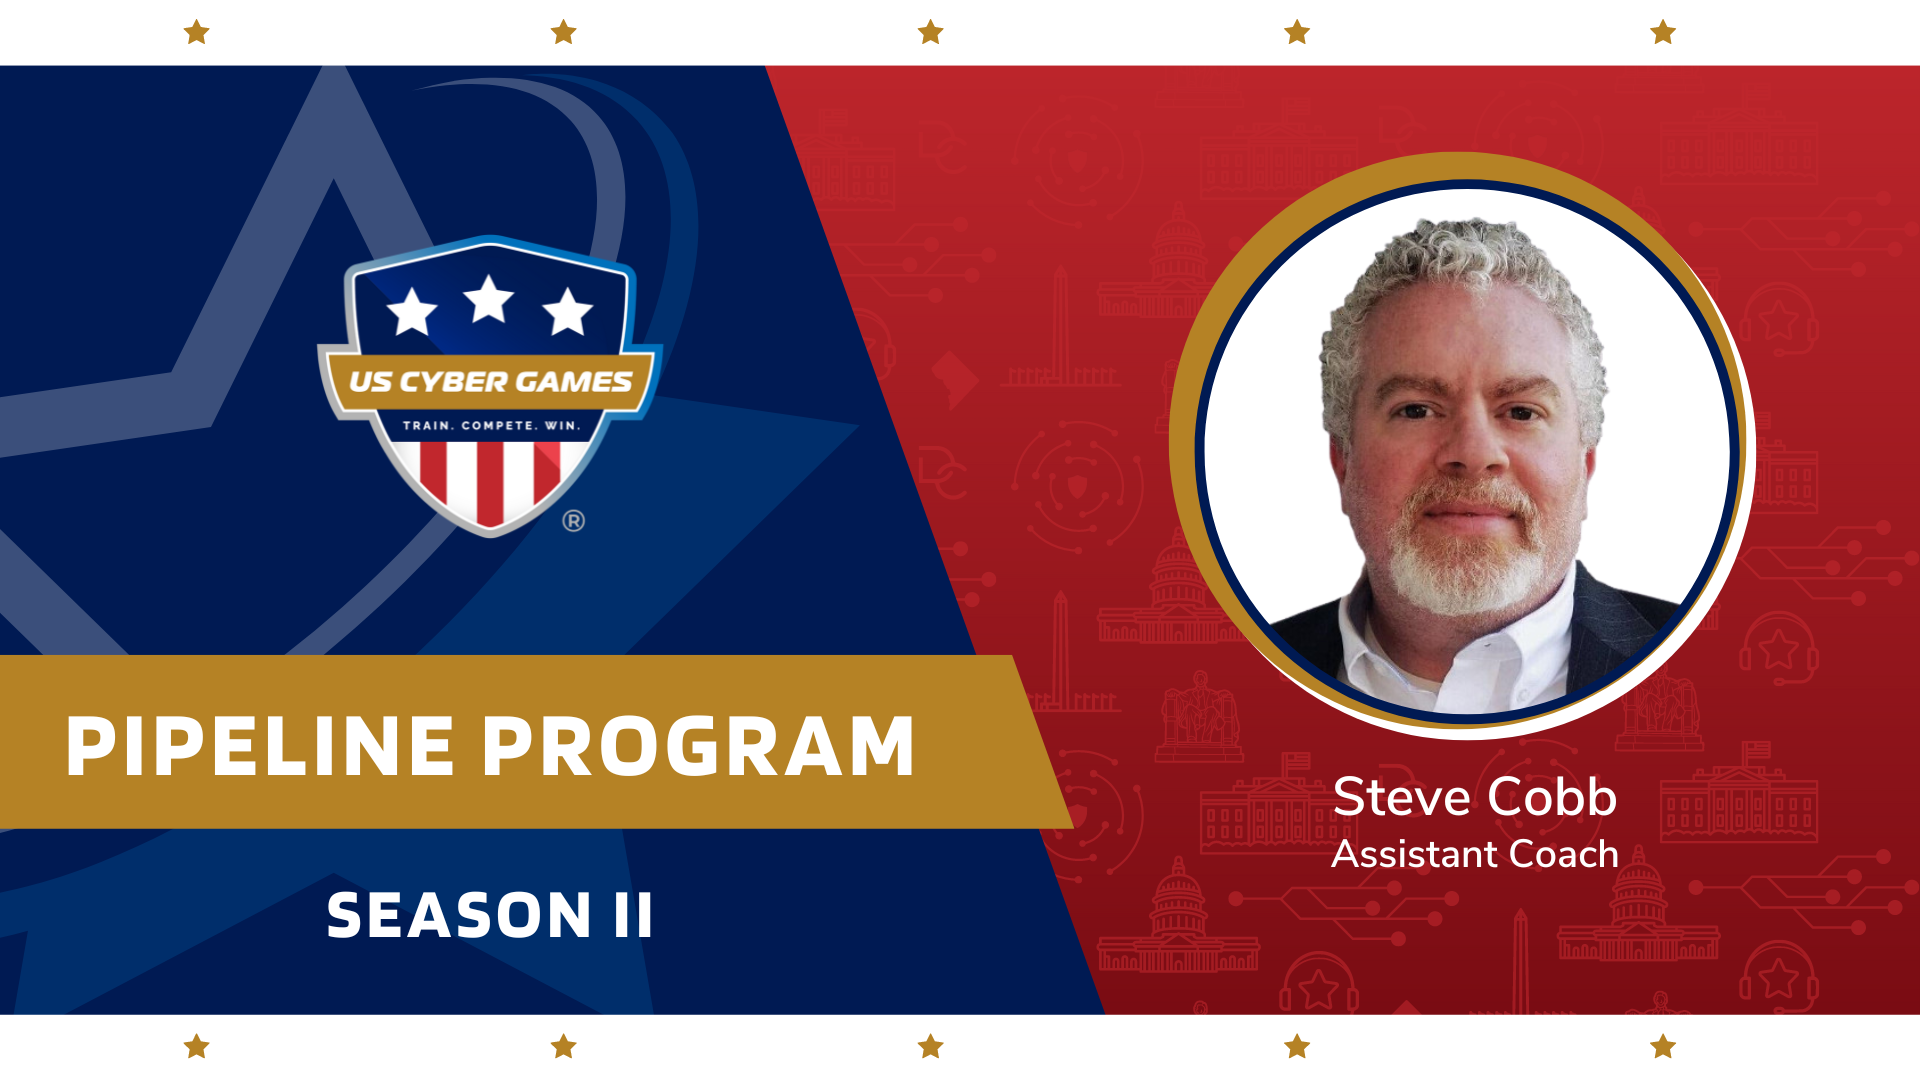 Watch the Season II, US Cyber Games Draft Day pipeline athlete selection with Steve Cobb, Season II, Assistant Coach